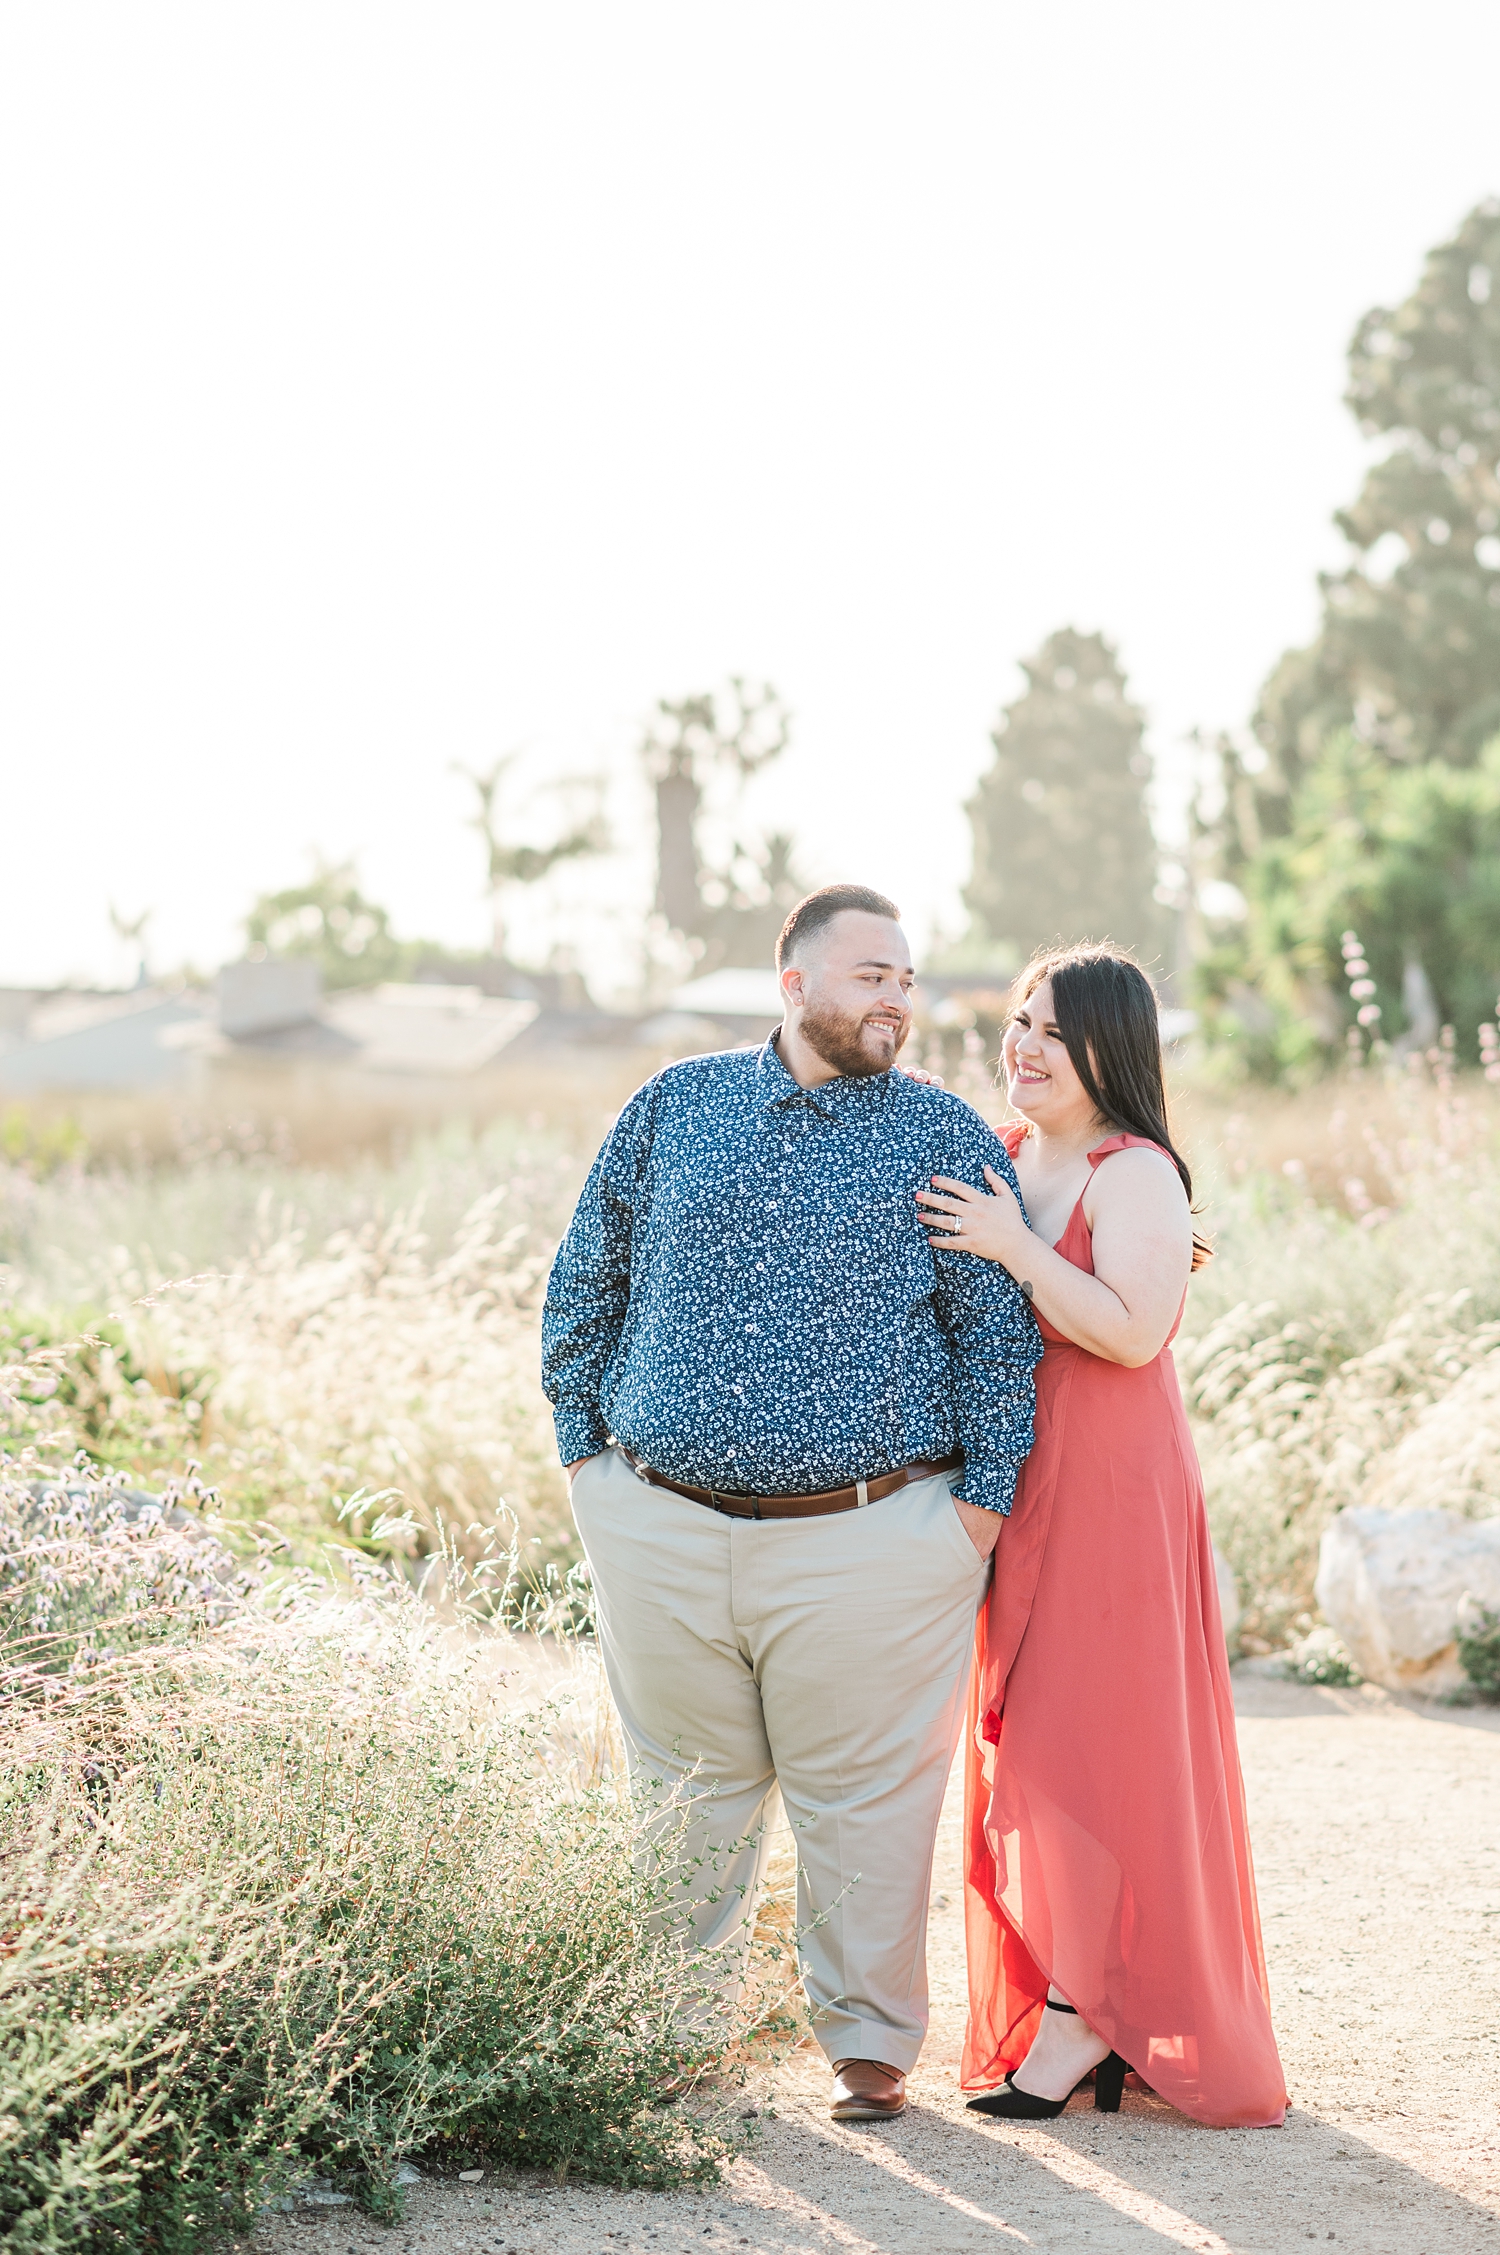 Beach Cliffs Engagement Session at Sunset | Nataly Hernandez Photography | Edwin and Susana-17.jpg